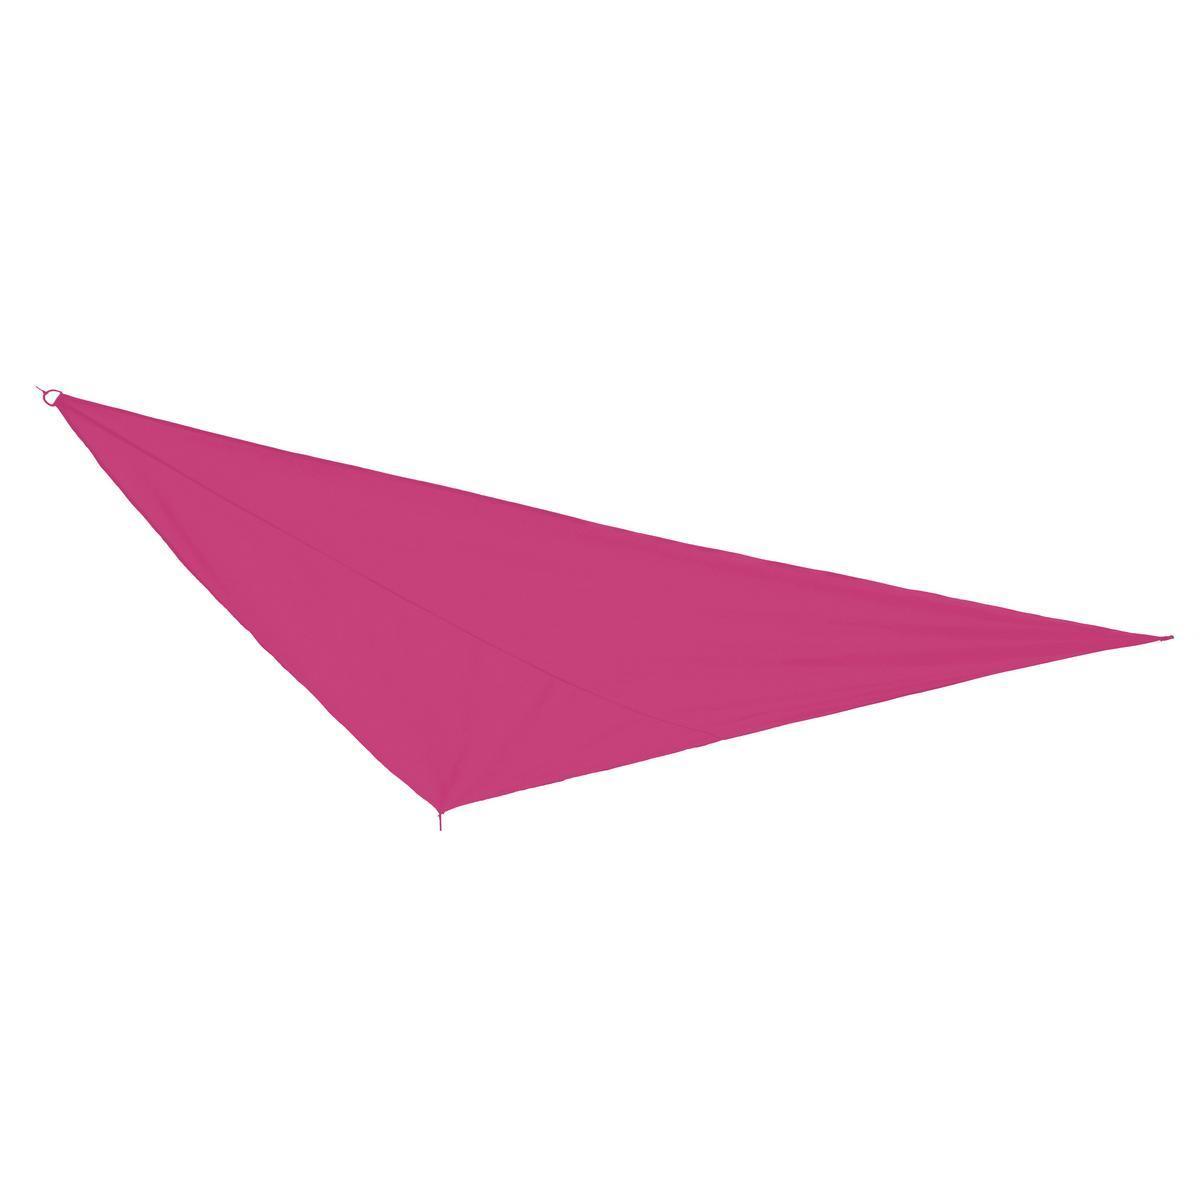 Voile d'ombrage triangulaire - Polyester - 5 x 5 x 5 m - Fuchsia